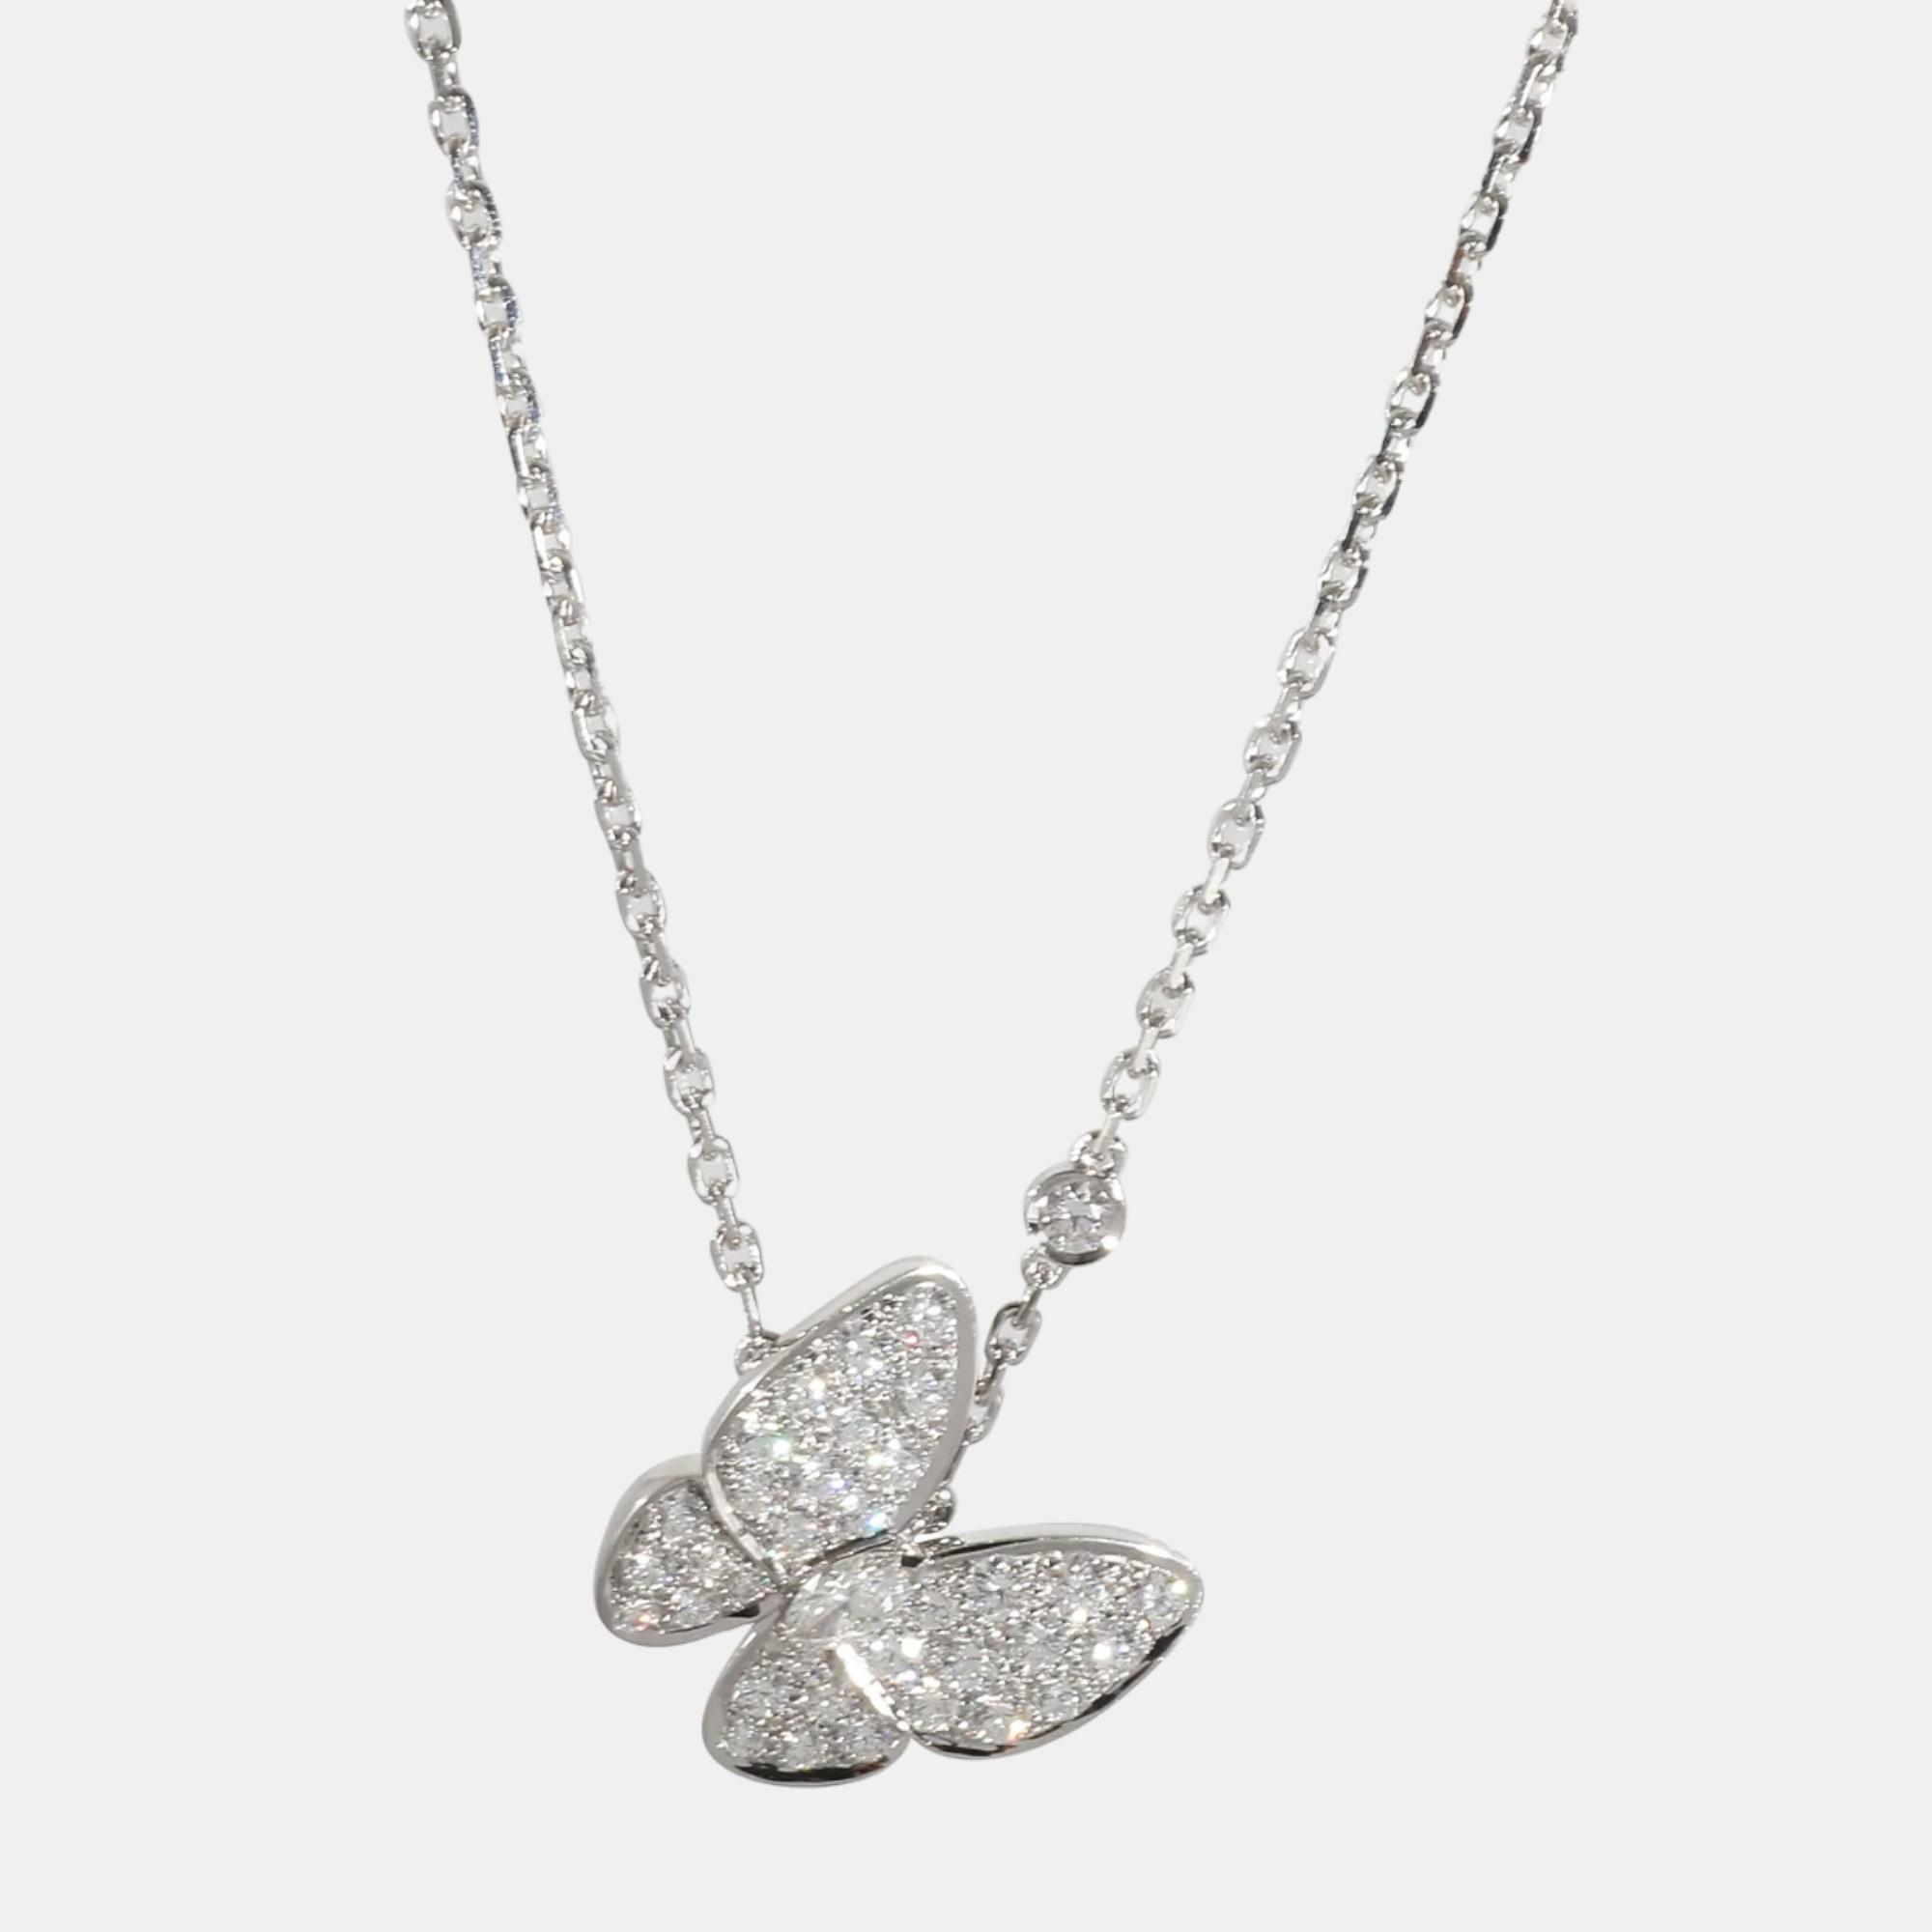 Van cleef & arpels 18k white gold two butterfly diamond pendant necklace